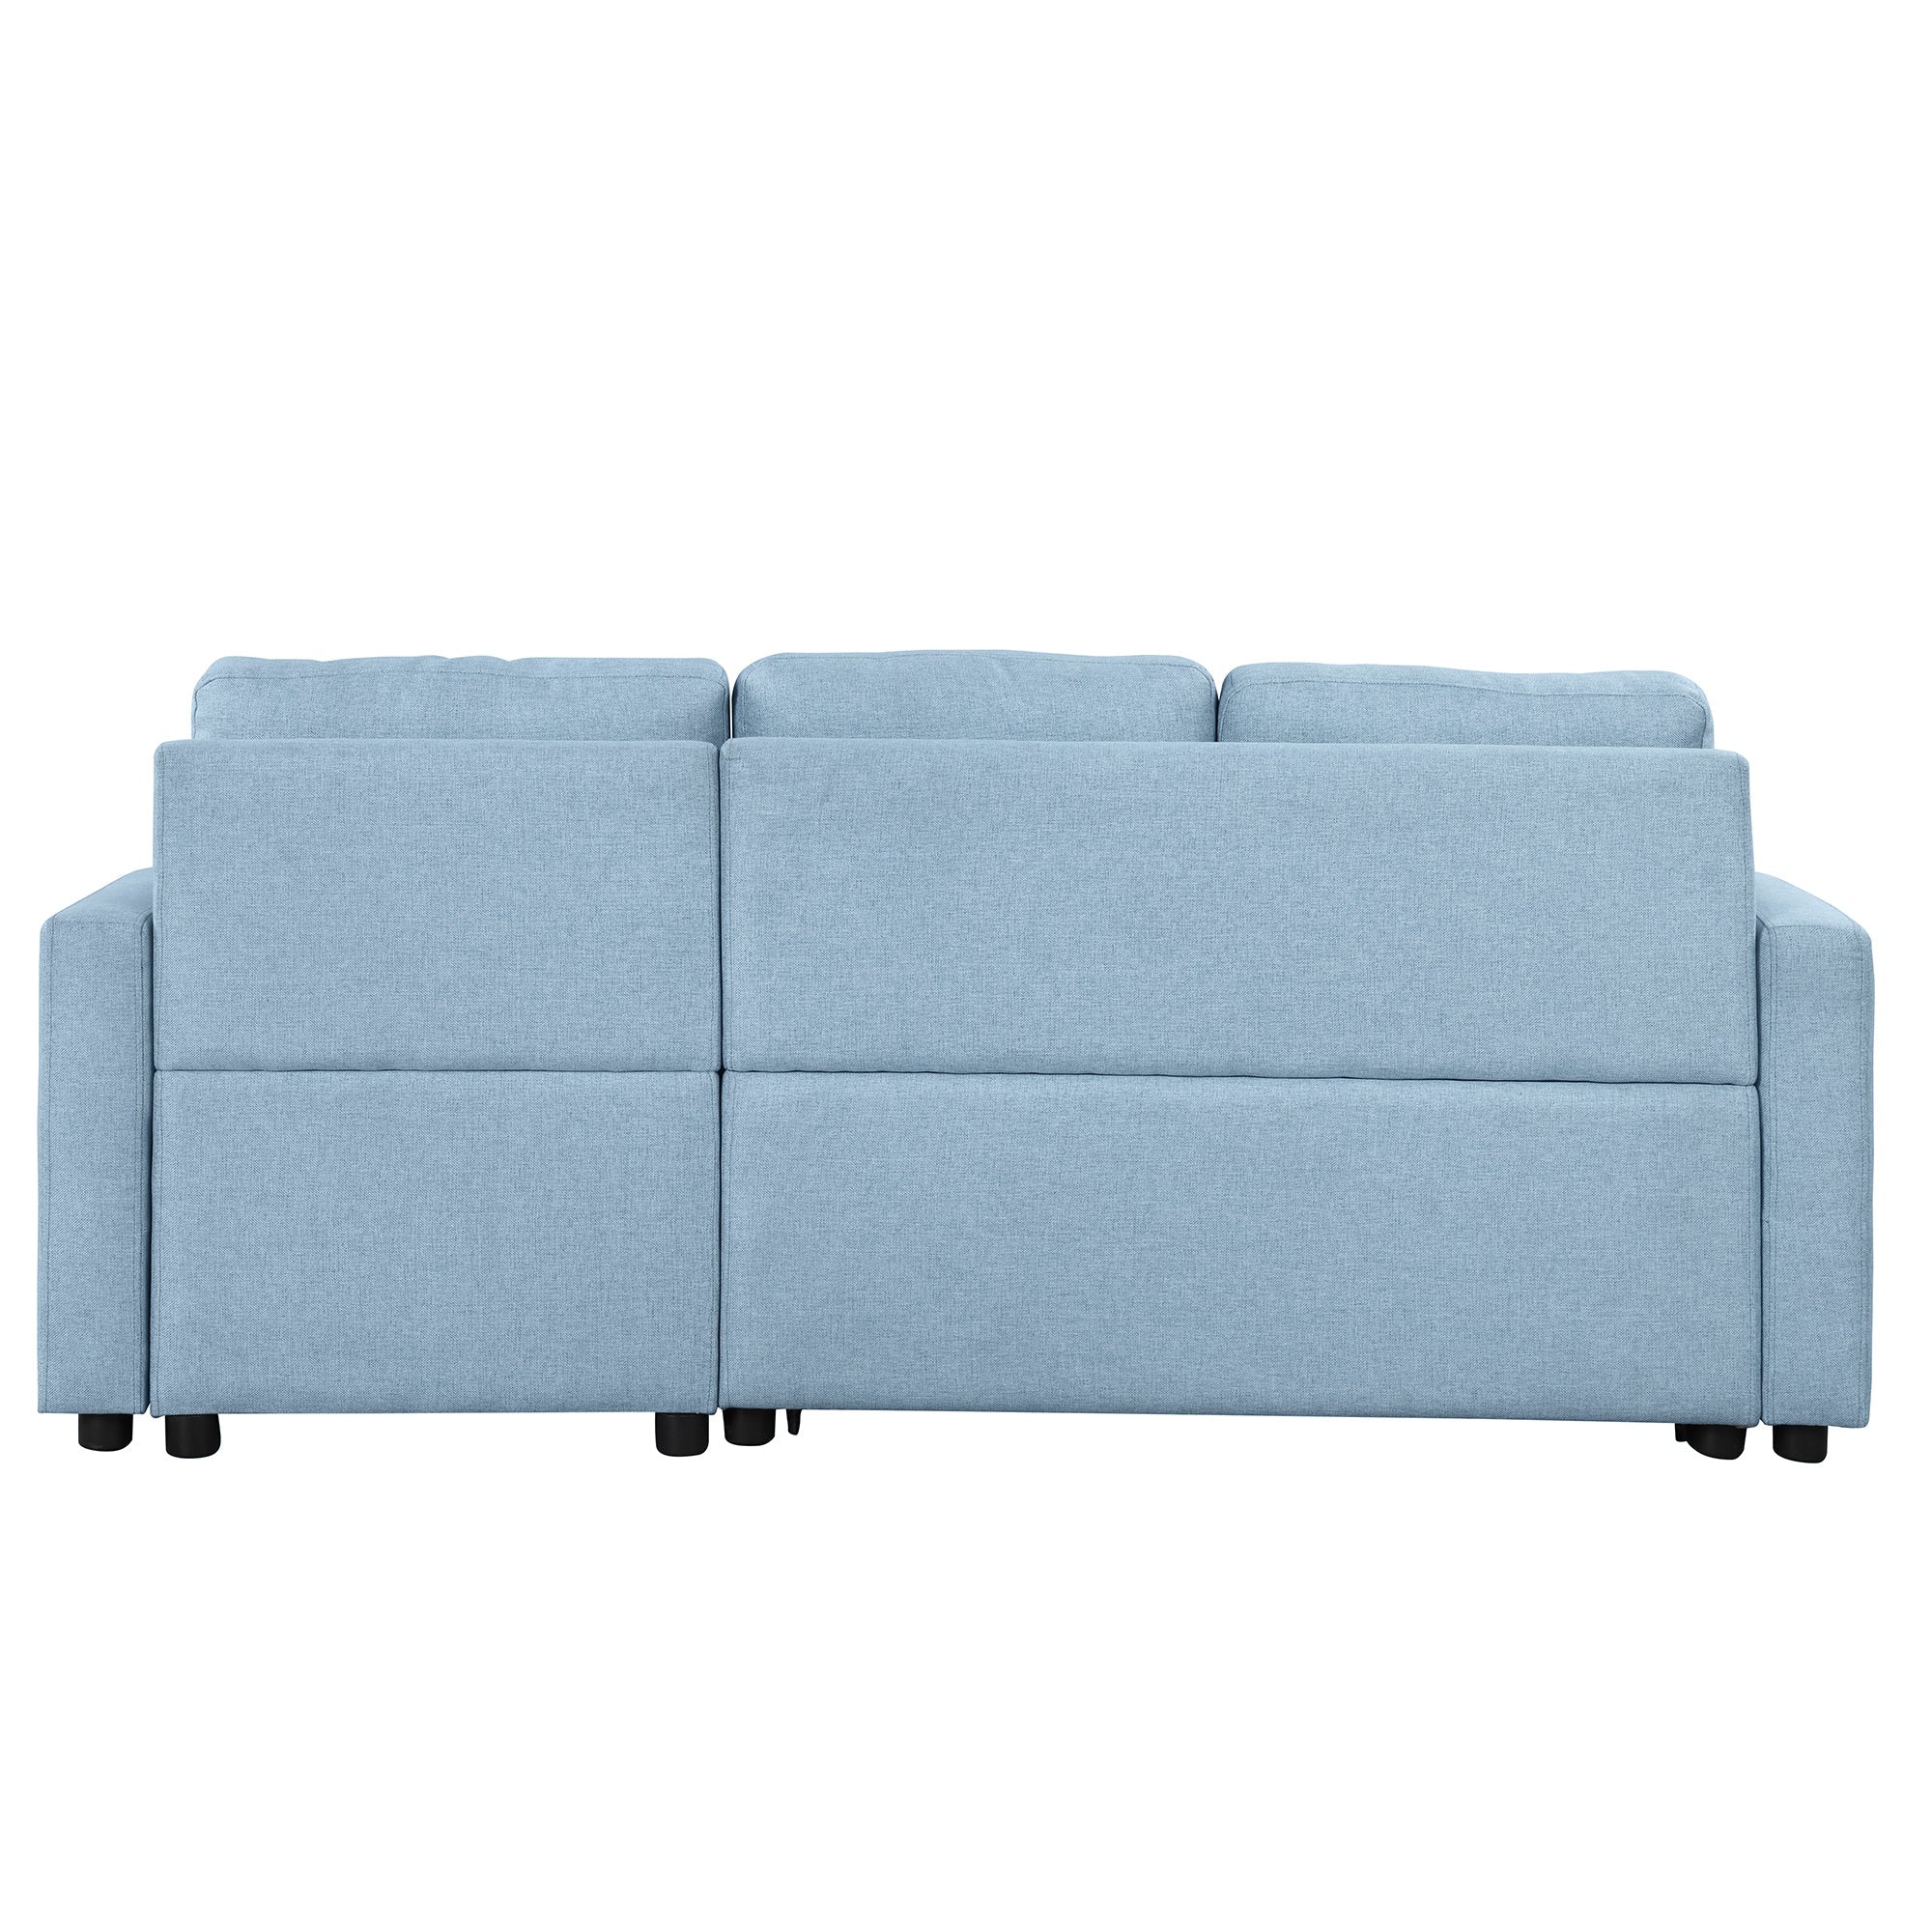 Orisfur Pull Out Sofa Bed Modern Padded Upholstered Sofa Bed | Linen Fabric 3 Seater Couch with Storage Chaise and Cup Holder | Ideal Small Couch for Small Spaces-Sleeper Sofas-American Furniture Outlet